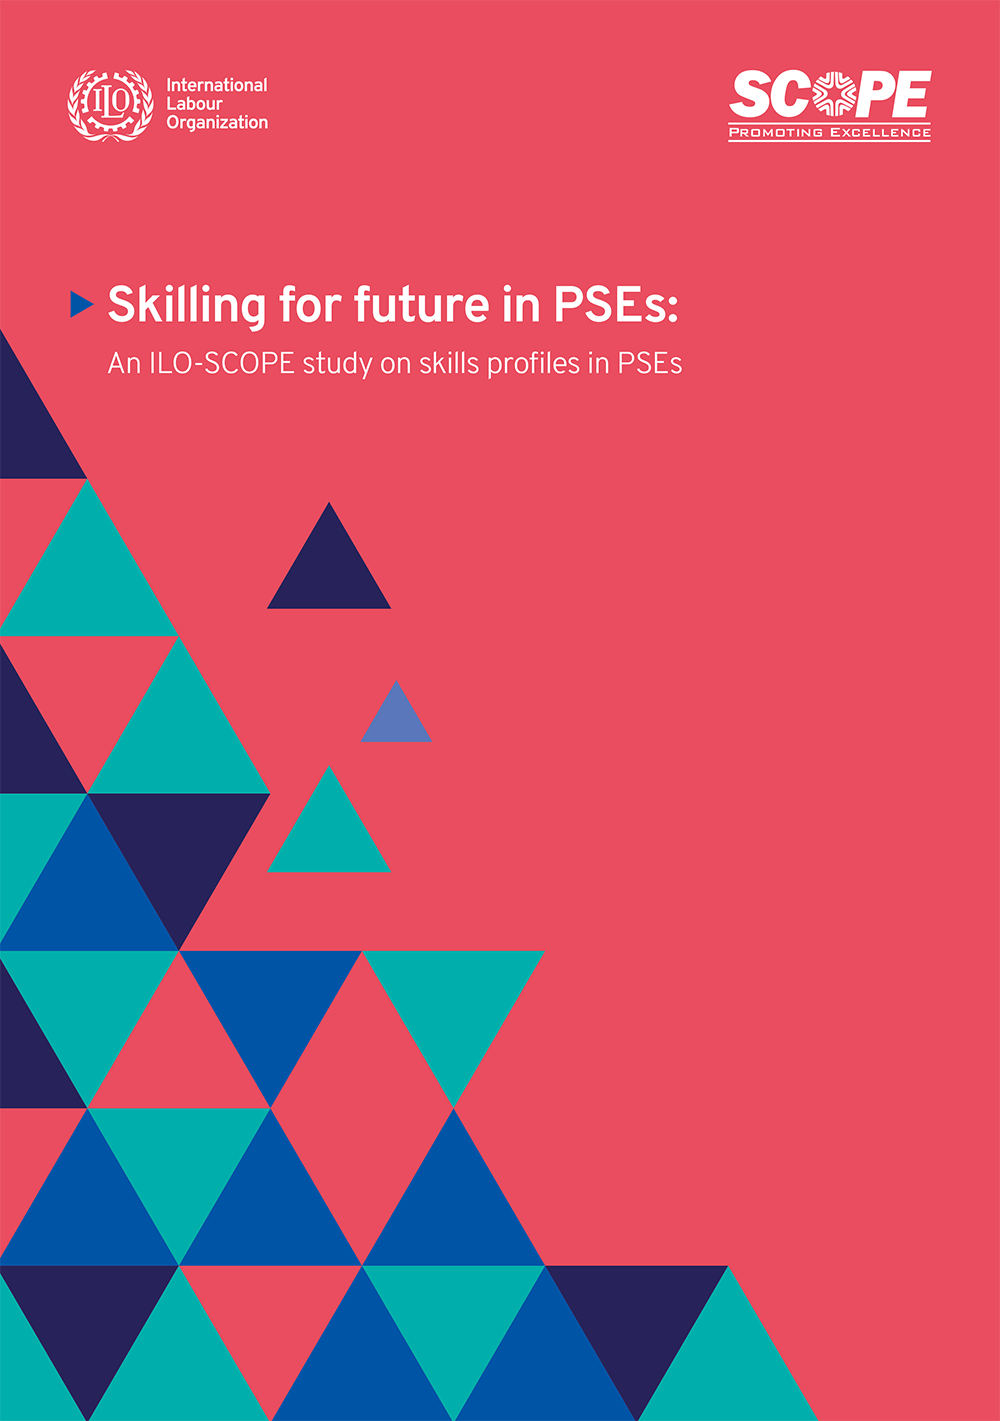 Skilling for future in PSEs’: An ILO-SCOPE study on skills profiles in PSEs